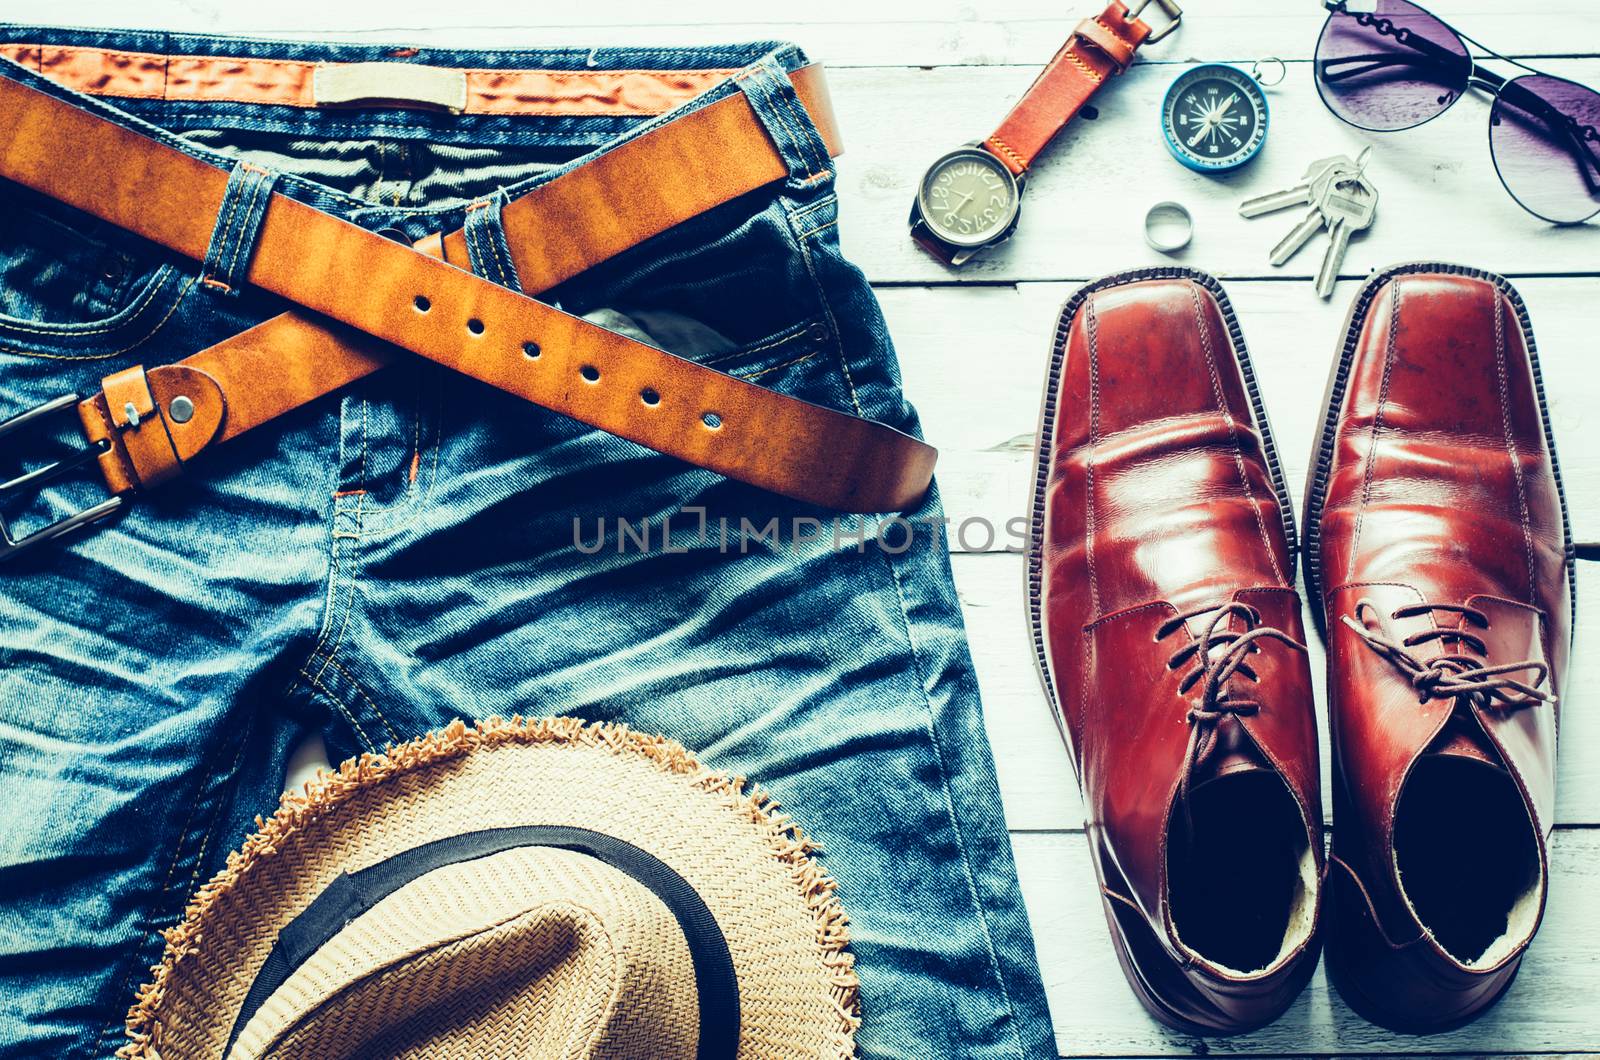 Clothing and accessories for men on wooden floor - concept lifes by photobyphotoboy